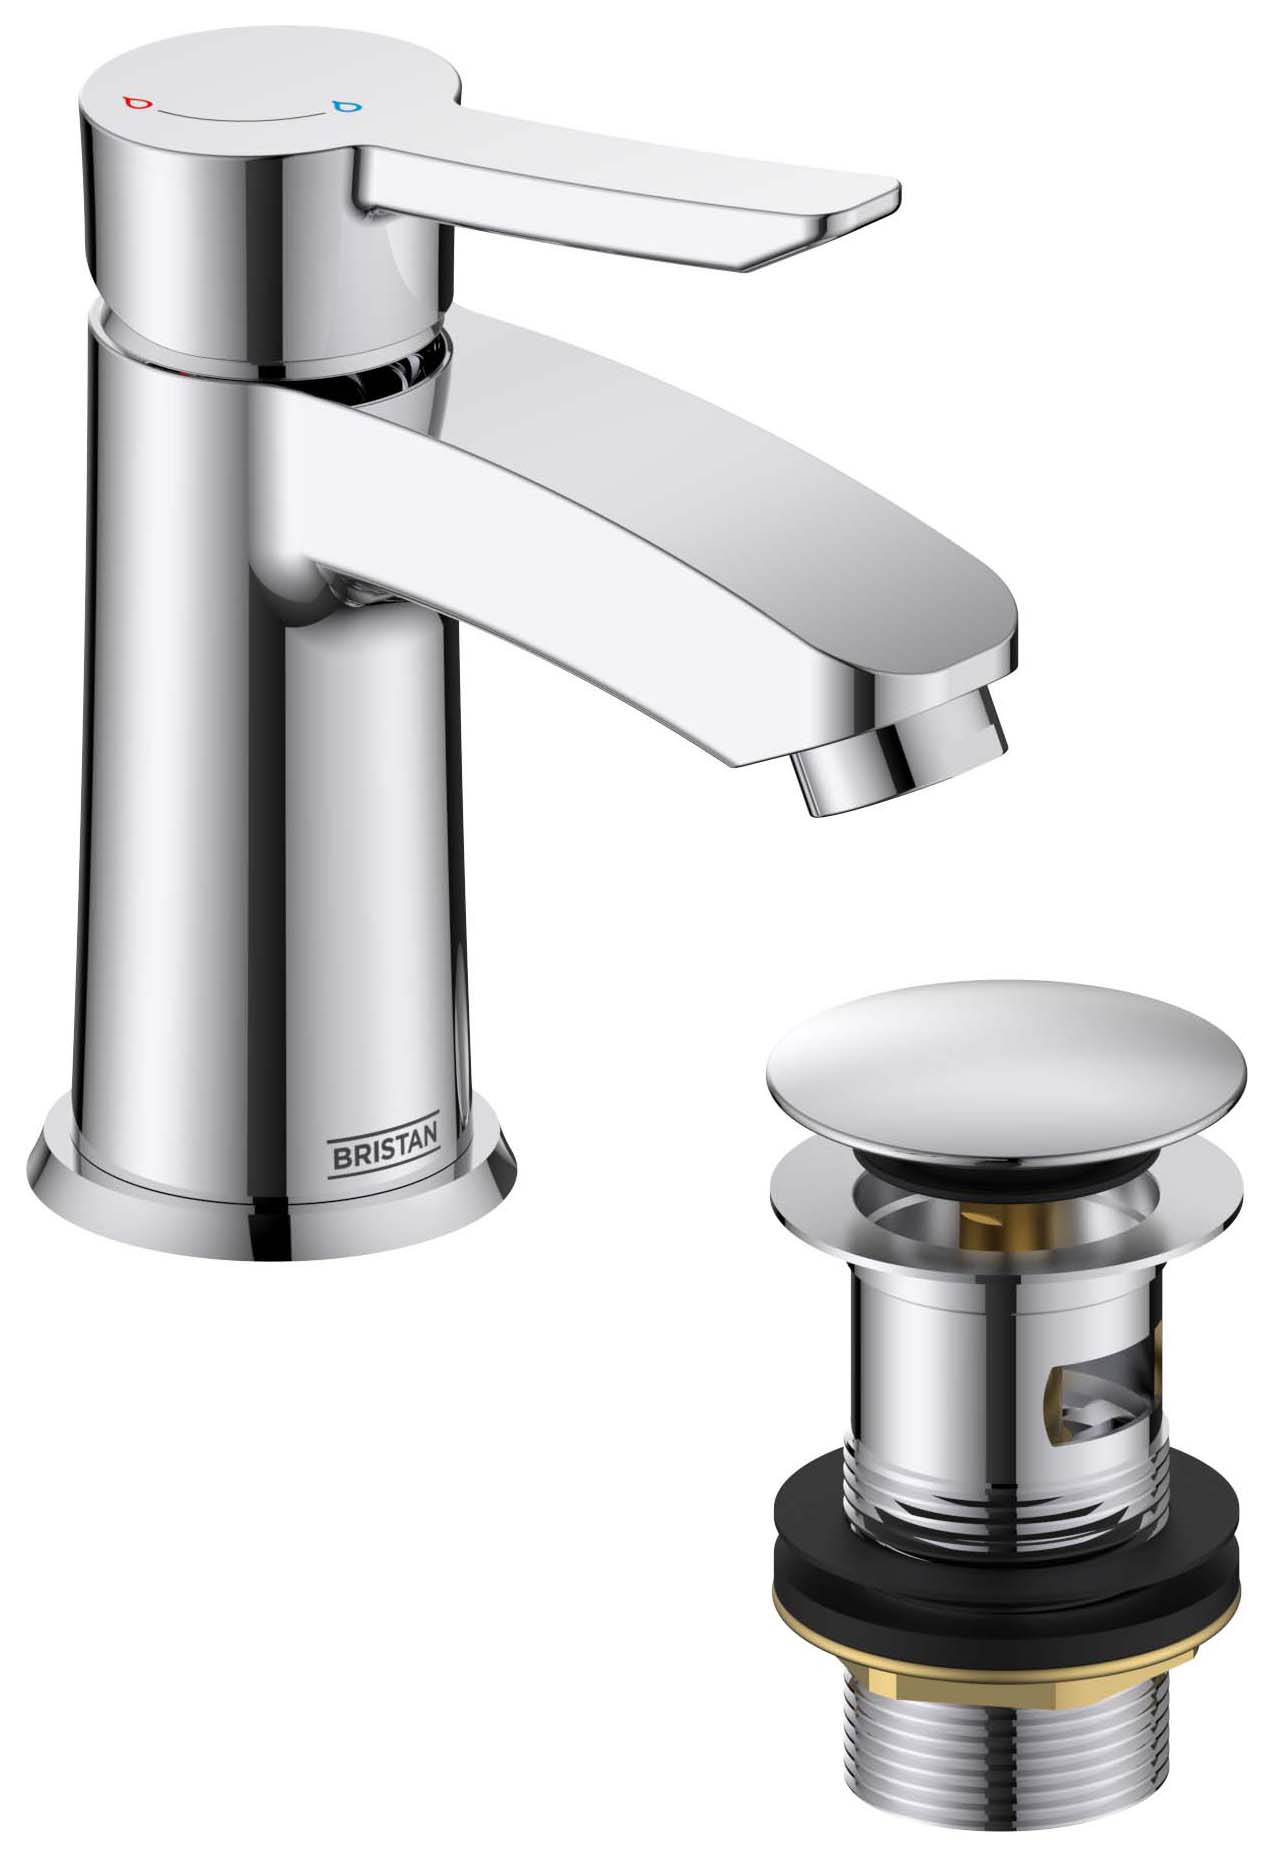 Image of Bristan Apelo Eco Start Small Basin Mixer Tap with Clicker Waste - Chrome